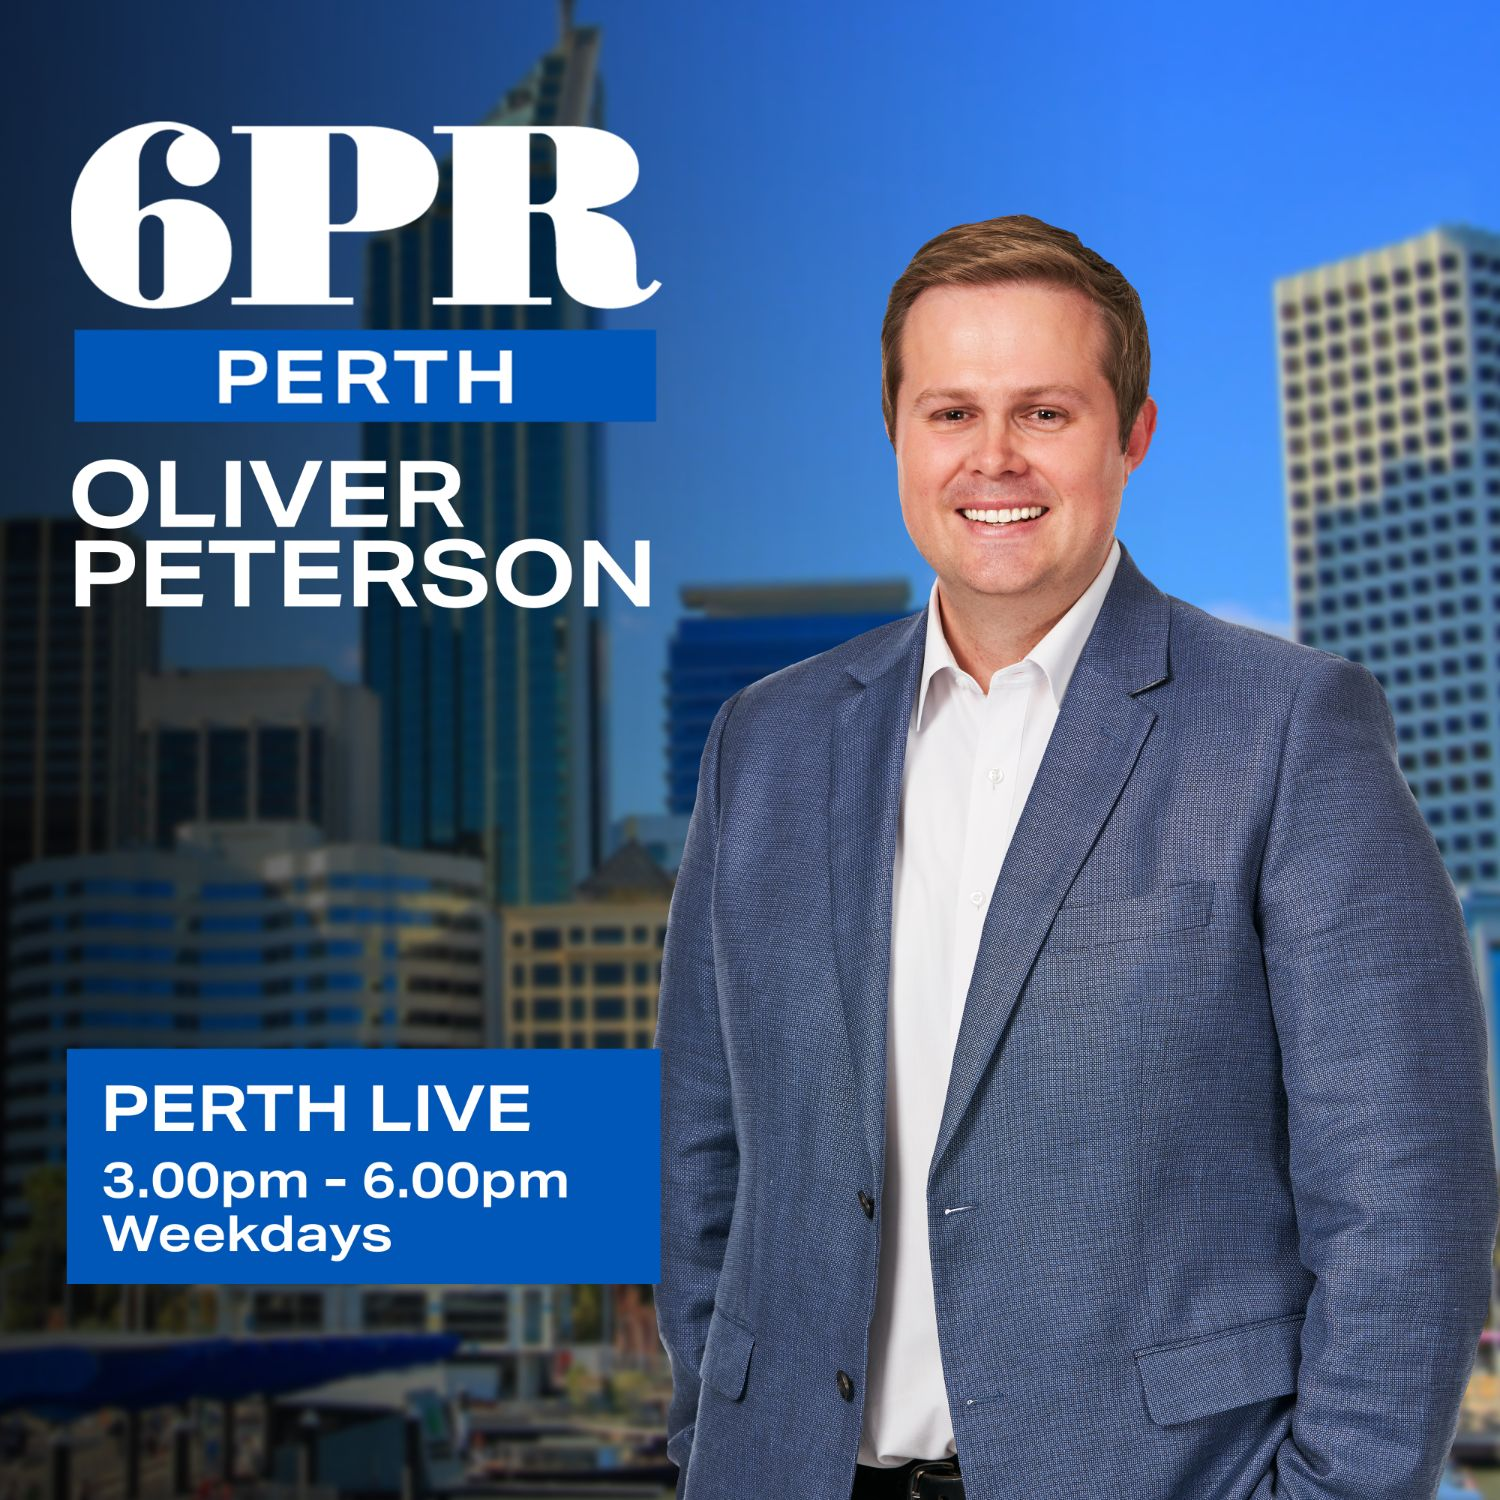 Prime Minister Albanese on Perth Live with Oliver Peterson